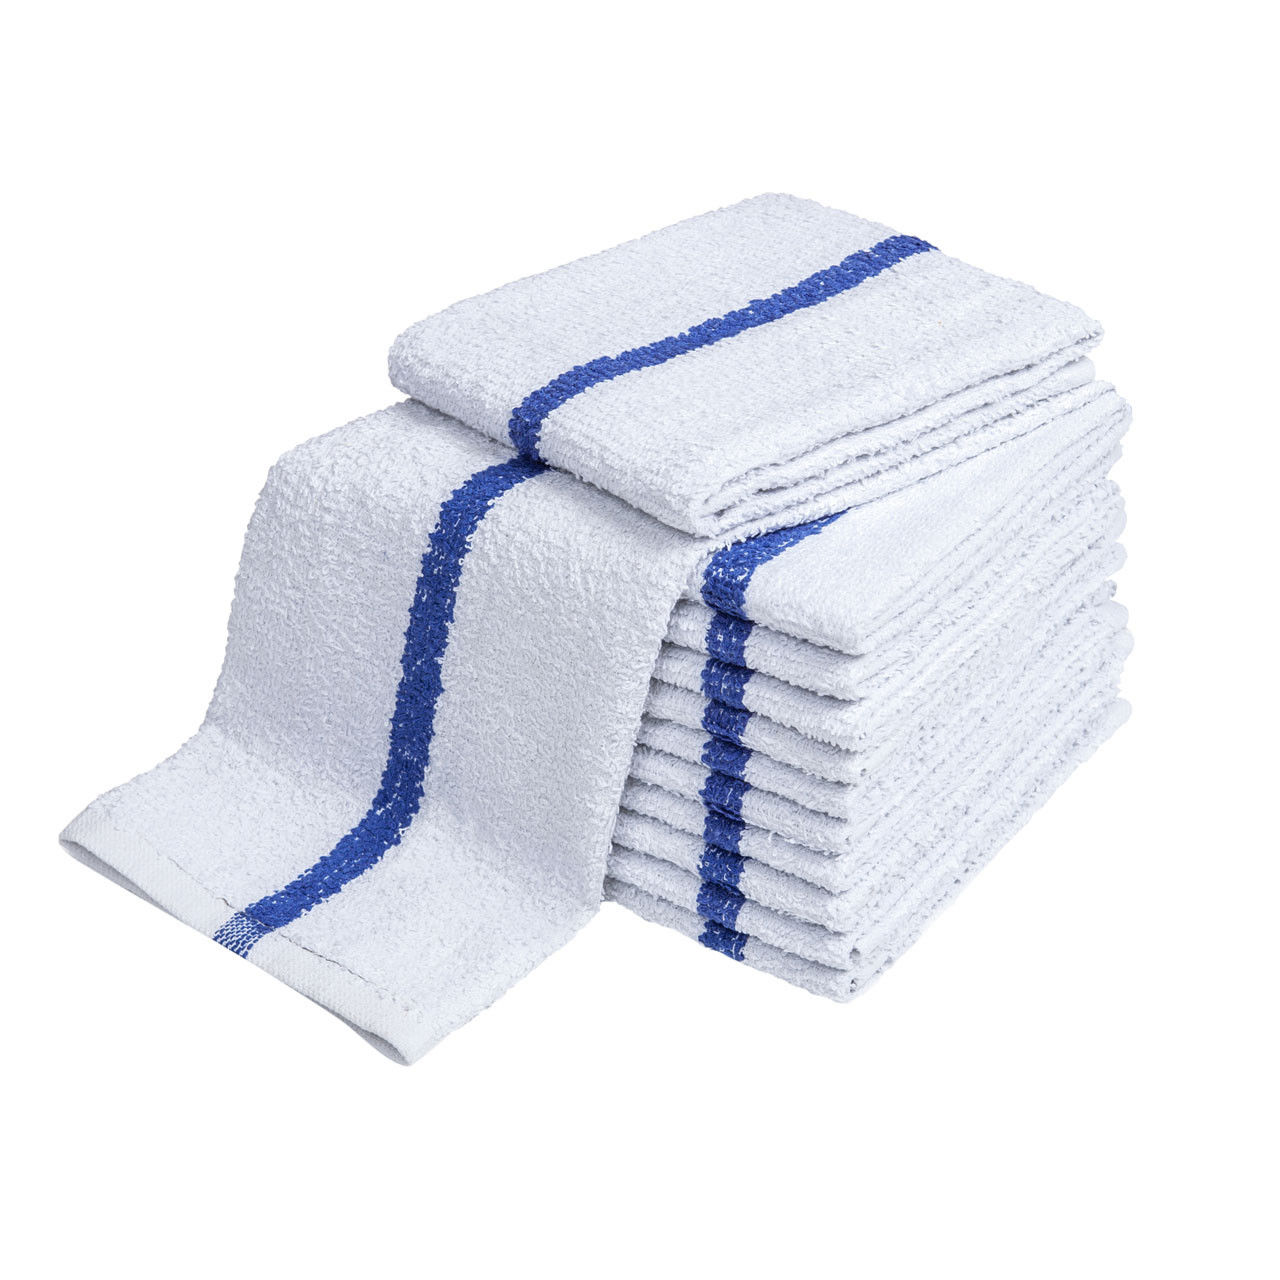 What are the towels at restaurants called?